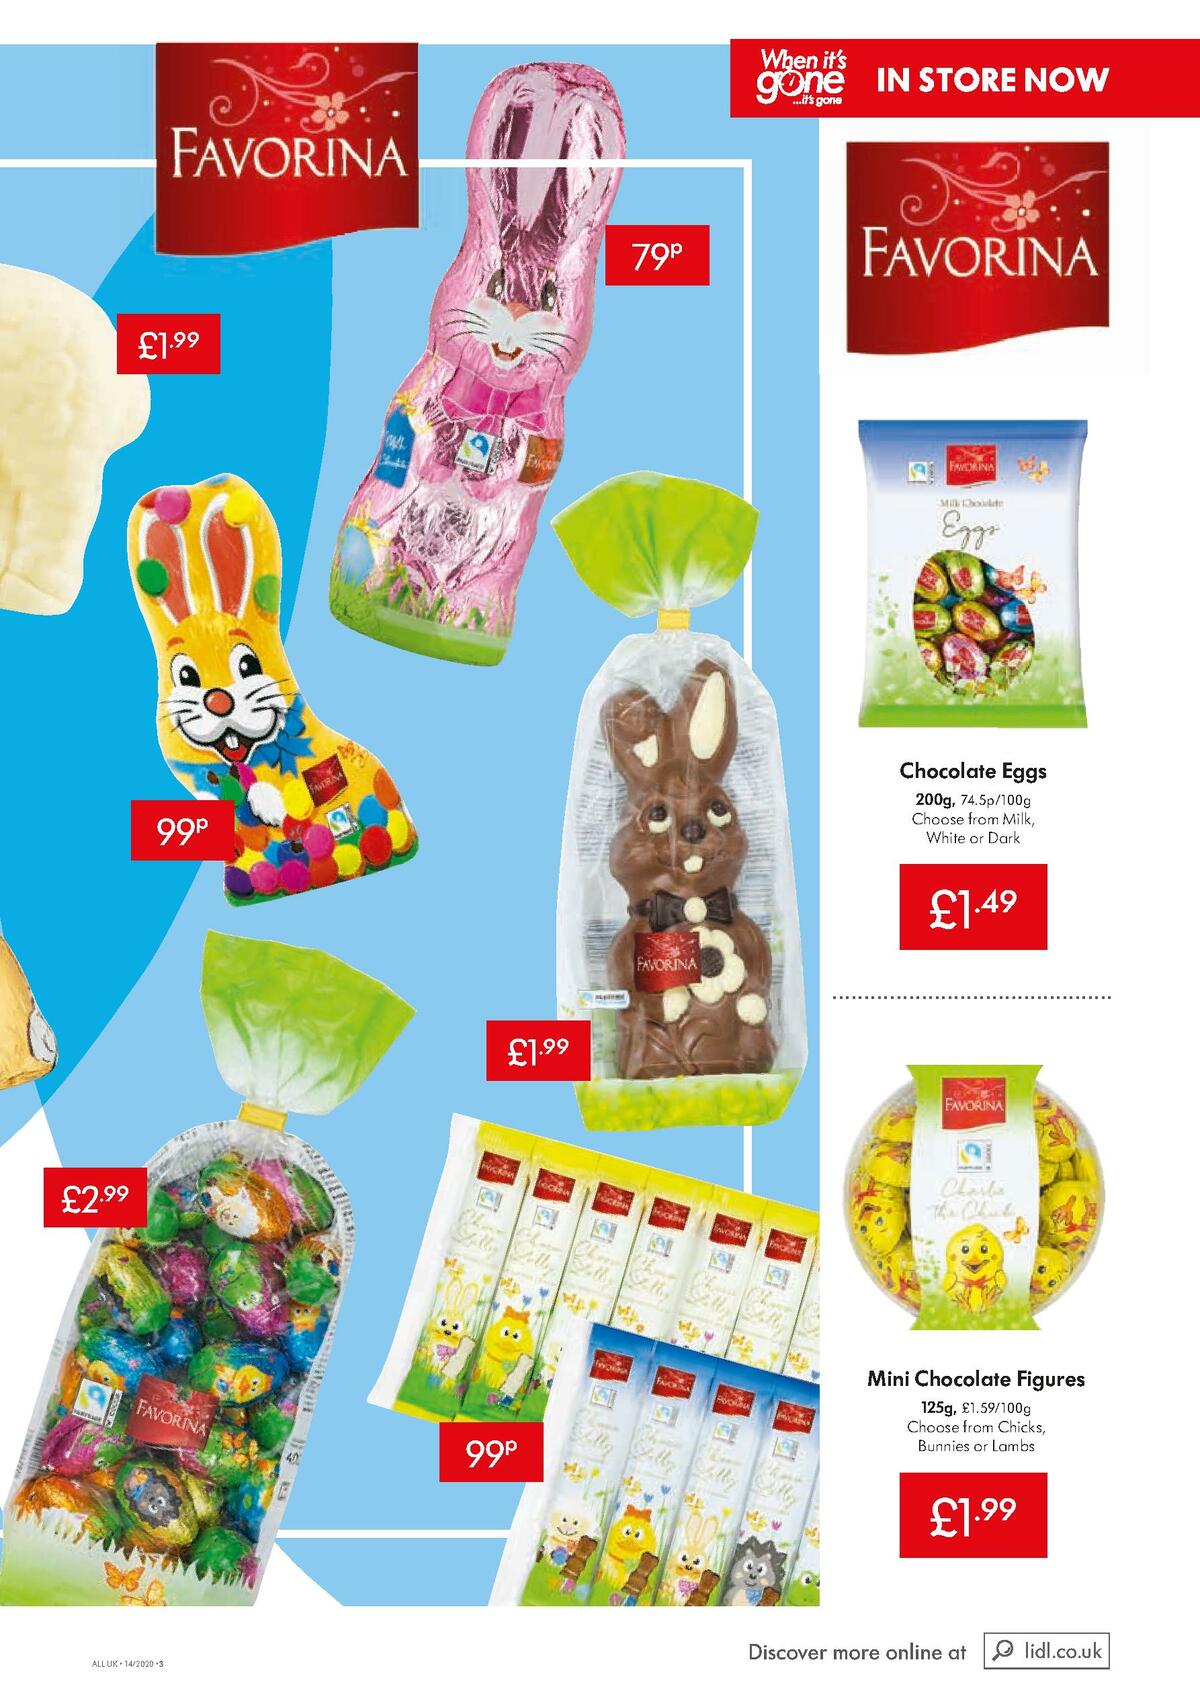 LIDL Offers from 2 April